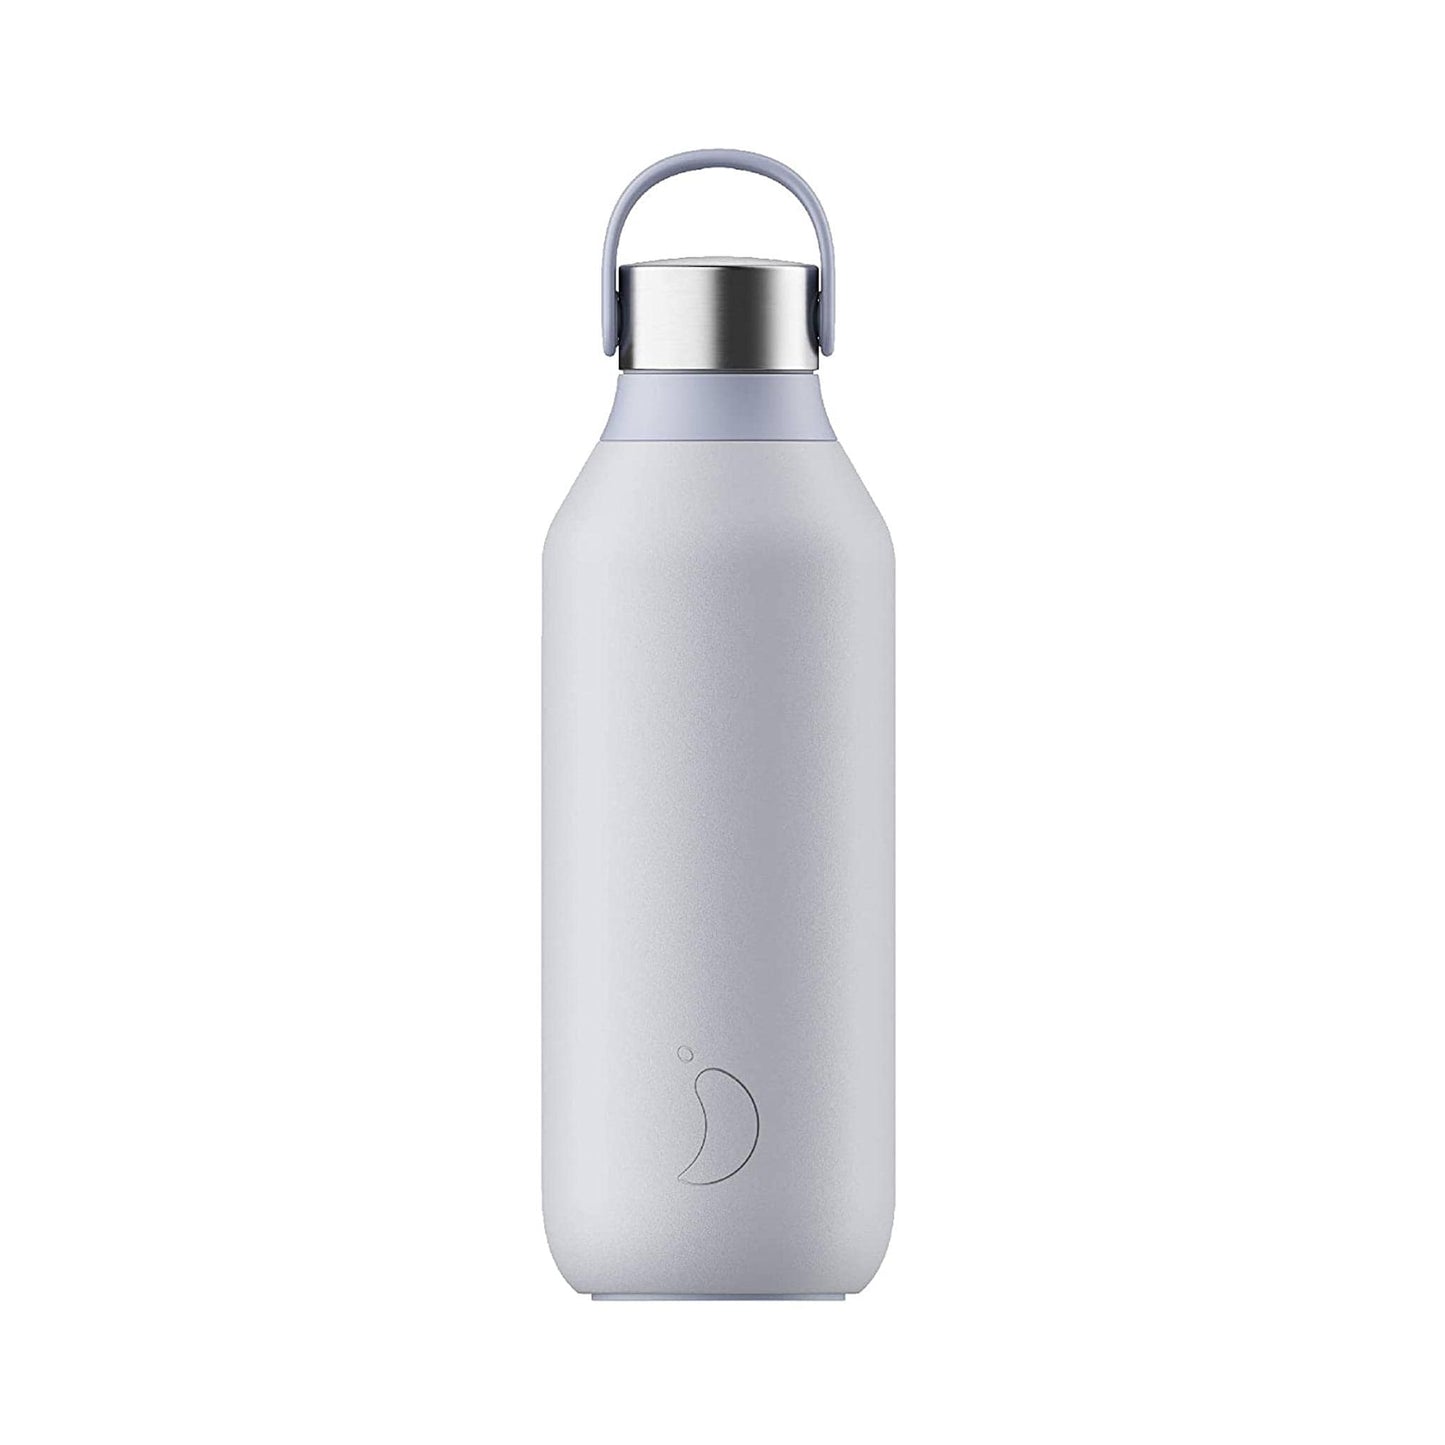 Chilly's Water Bottles Chilly’s 500ml Series 2 Stainless Steel Water Bottle - Frost Blue